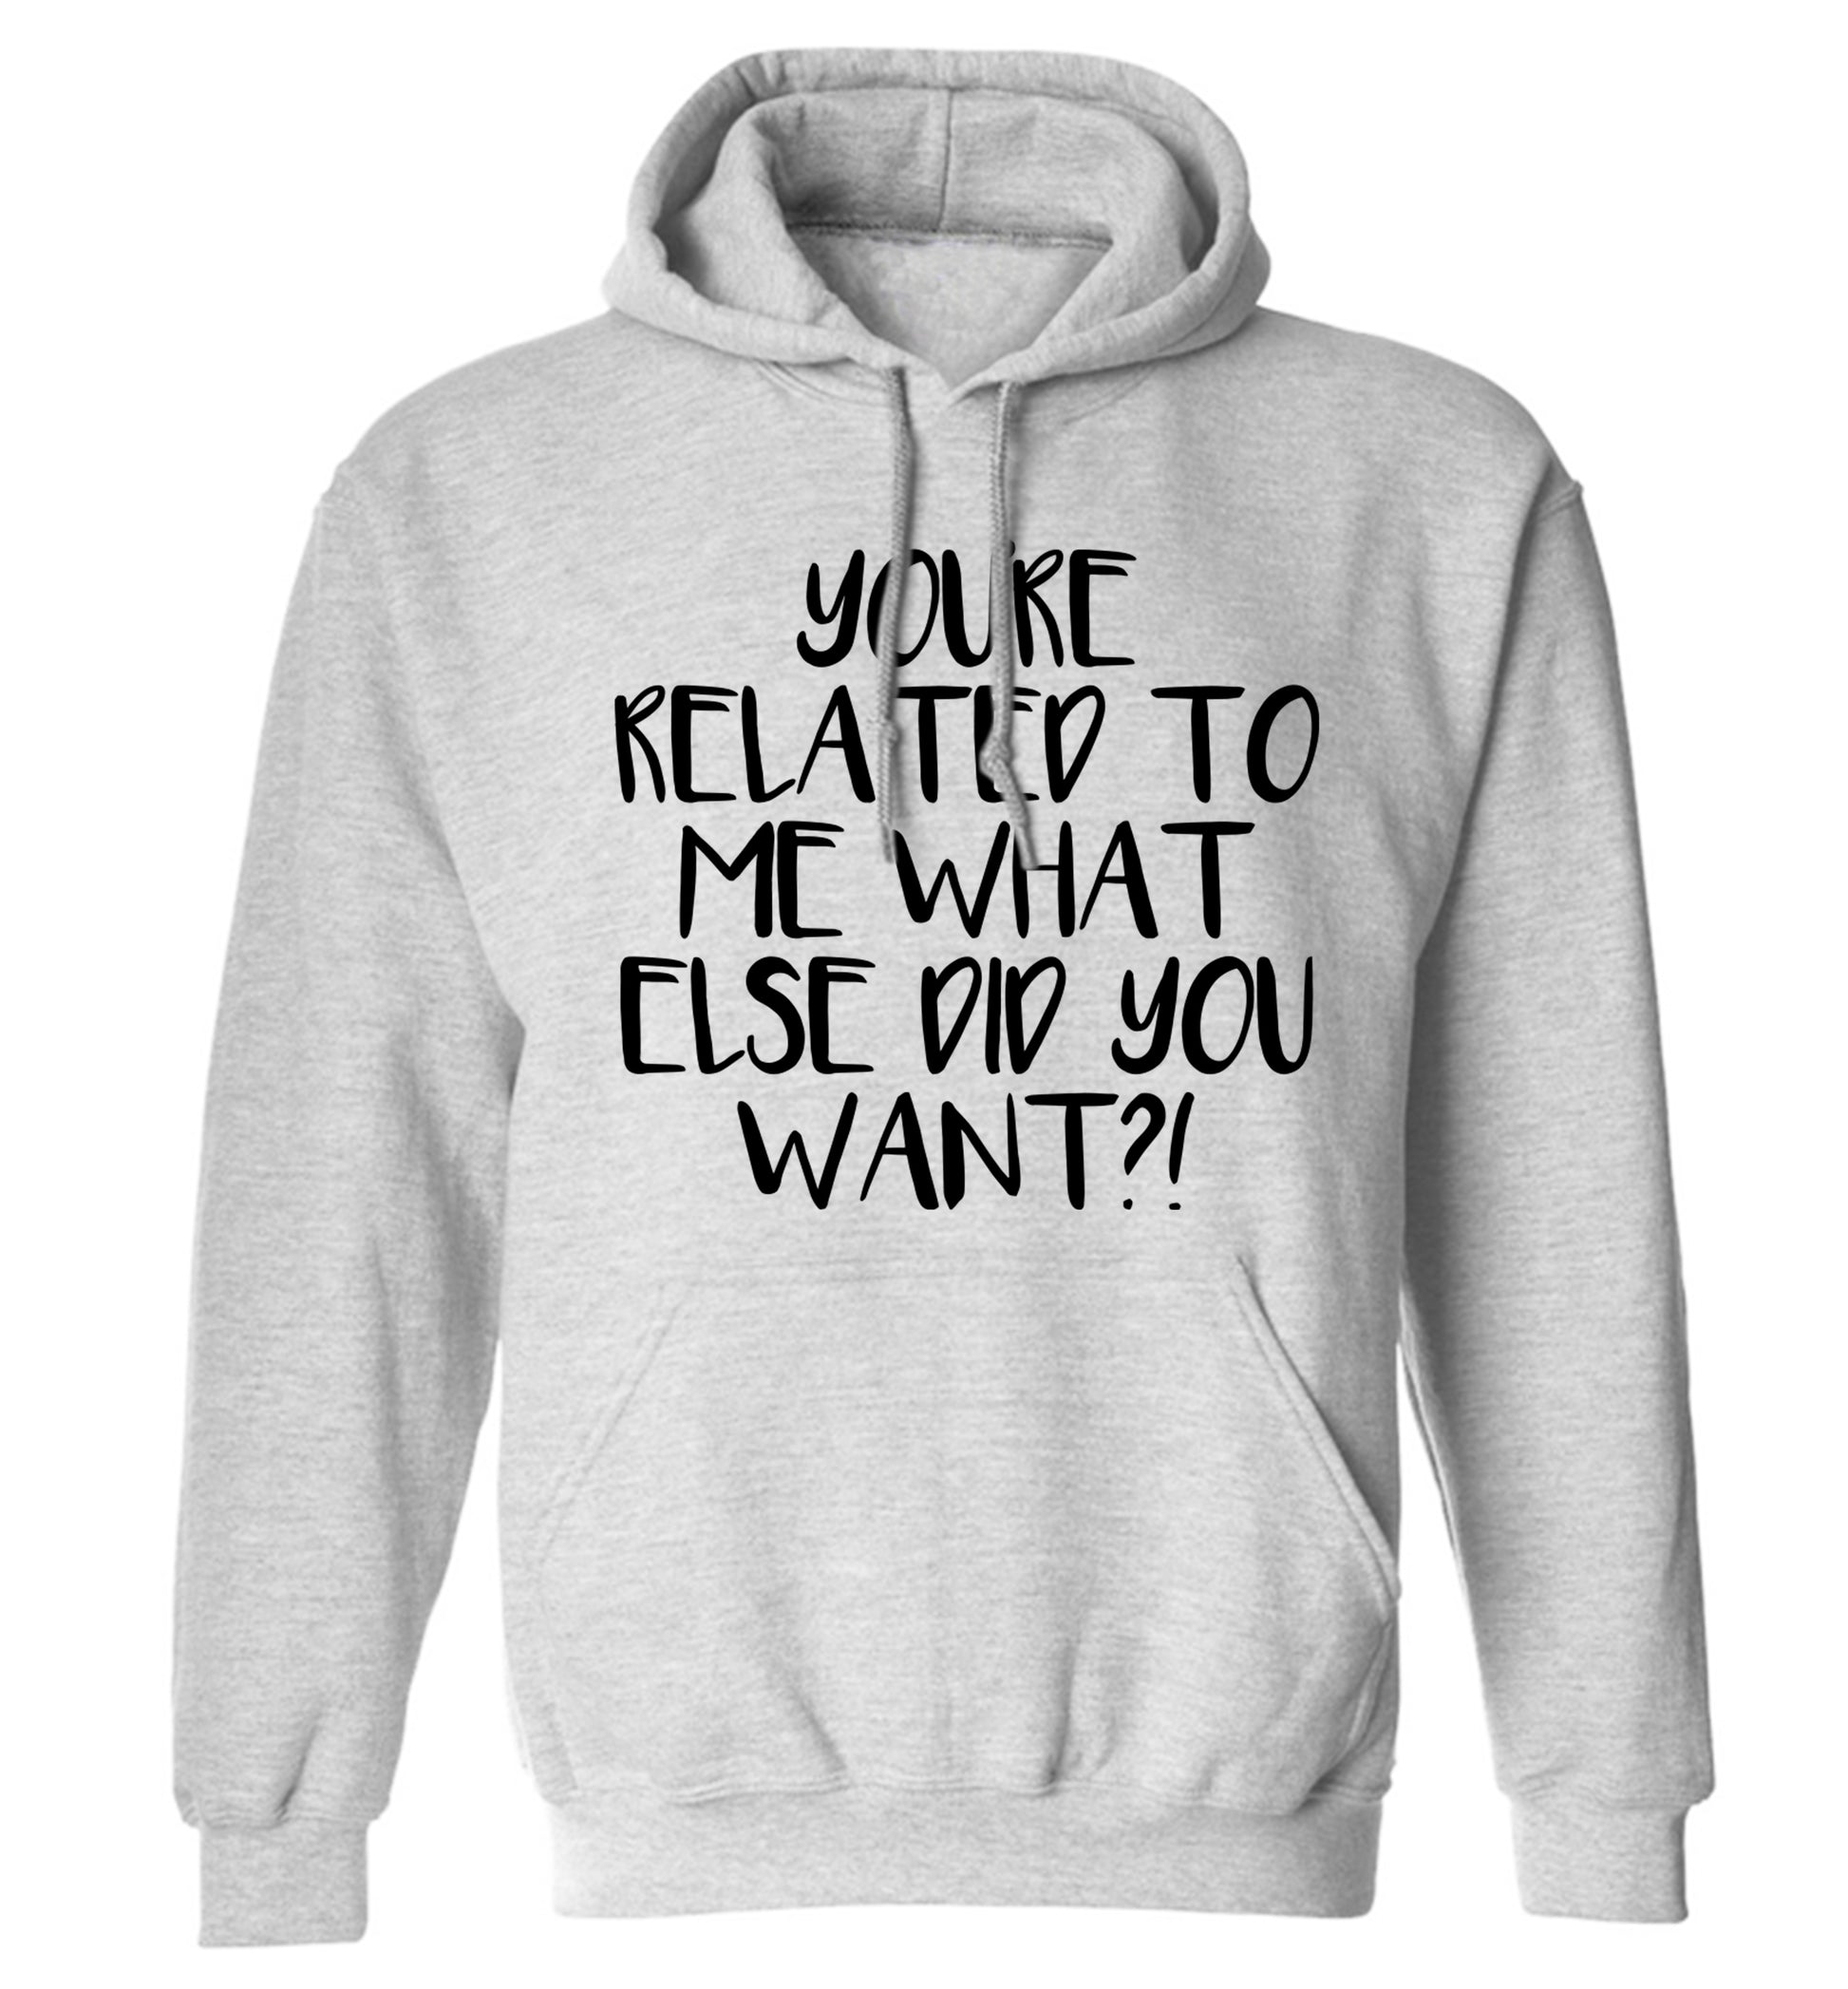 You're related to me what more do you want? adults unisex grey hoodie 2XL